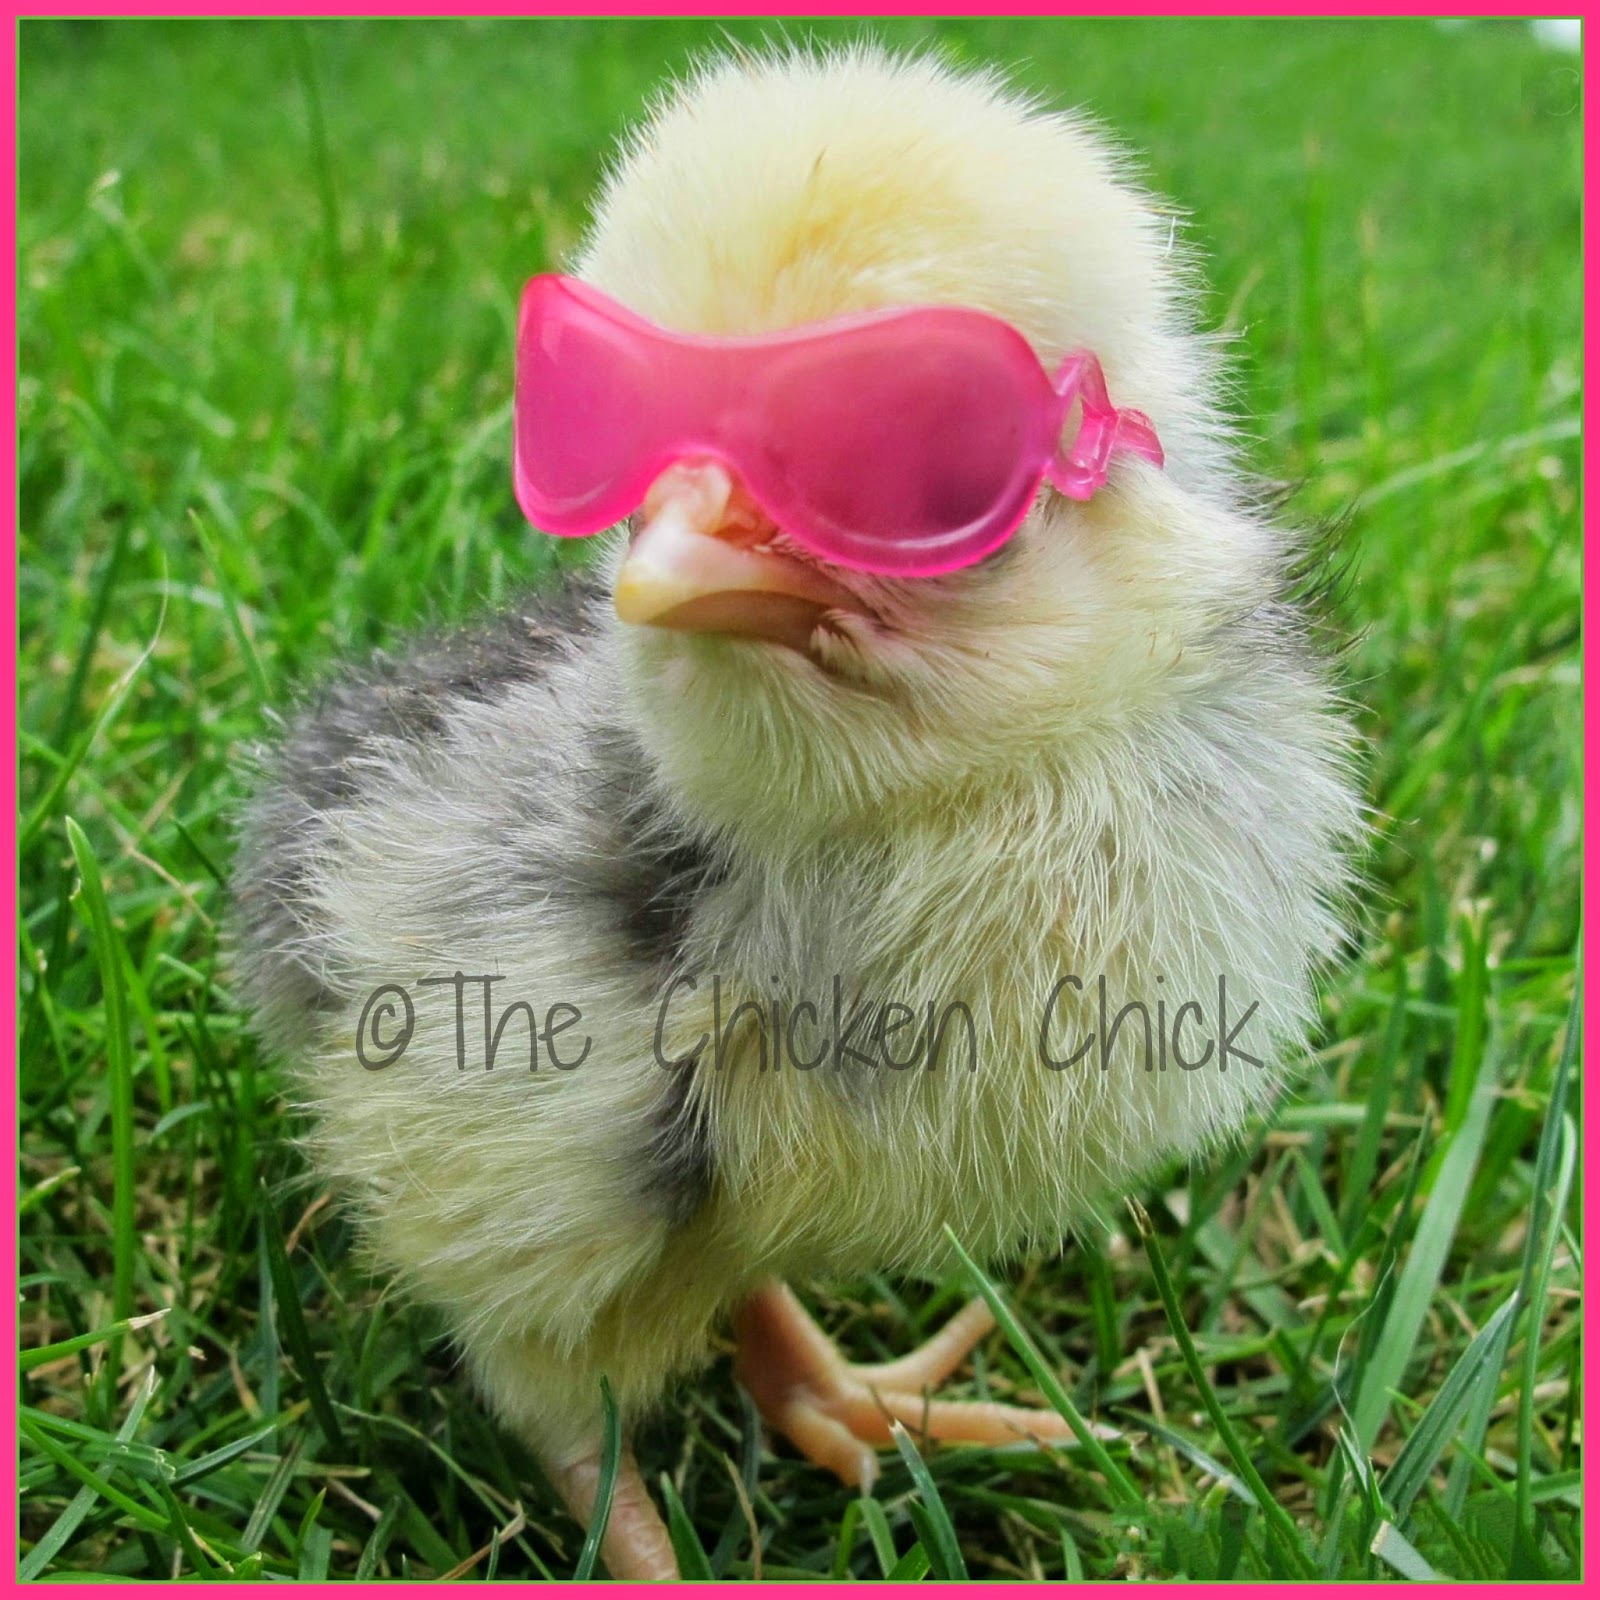 The Chicken Chick®: My Favorite Photos of Baby Chicks